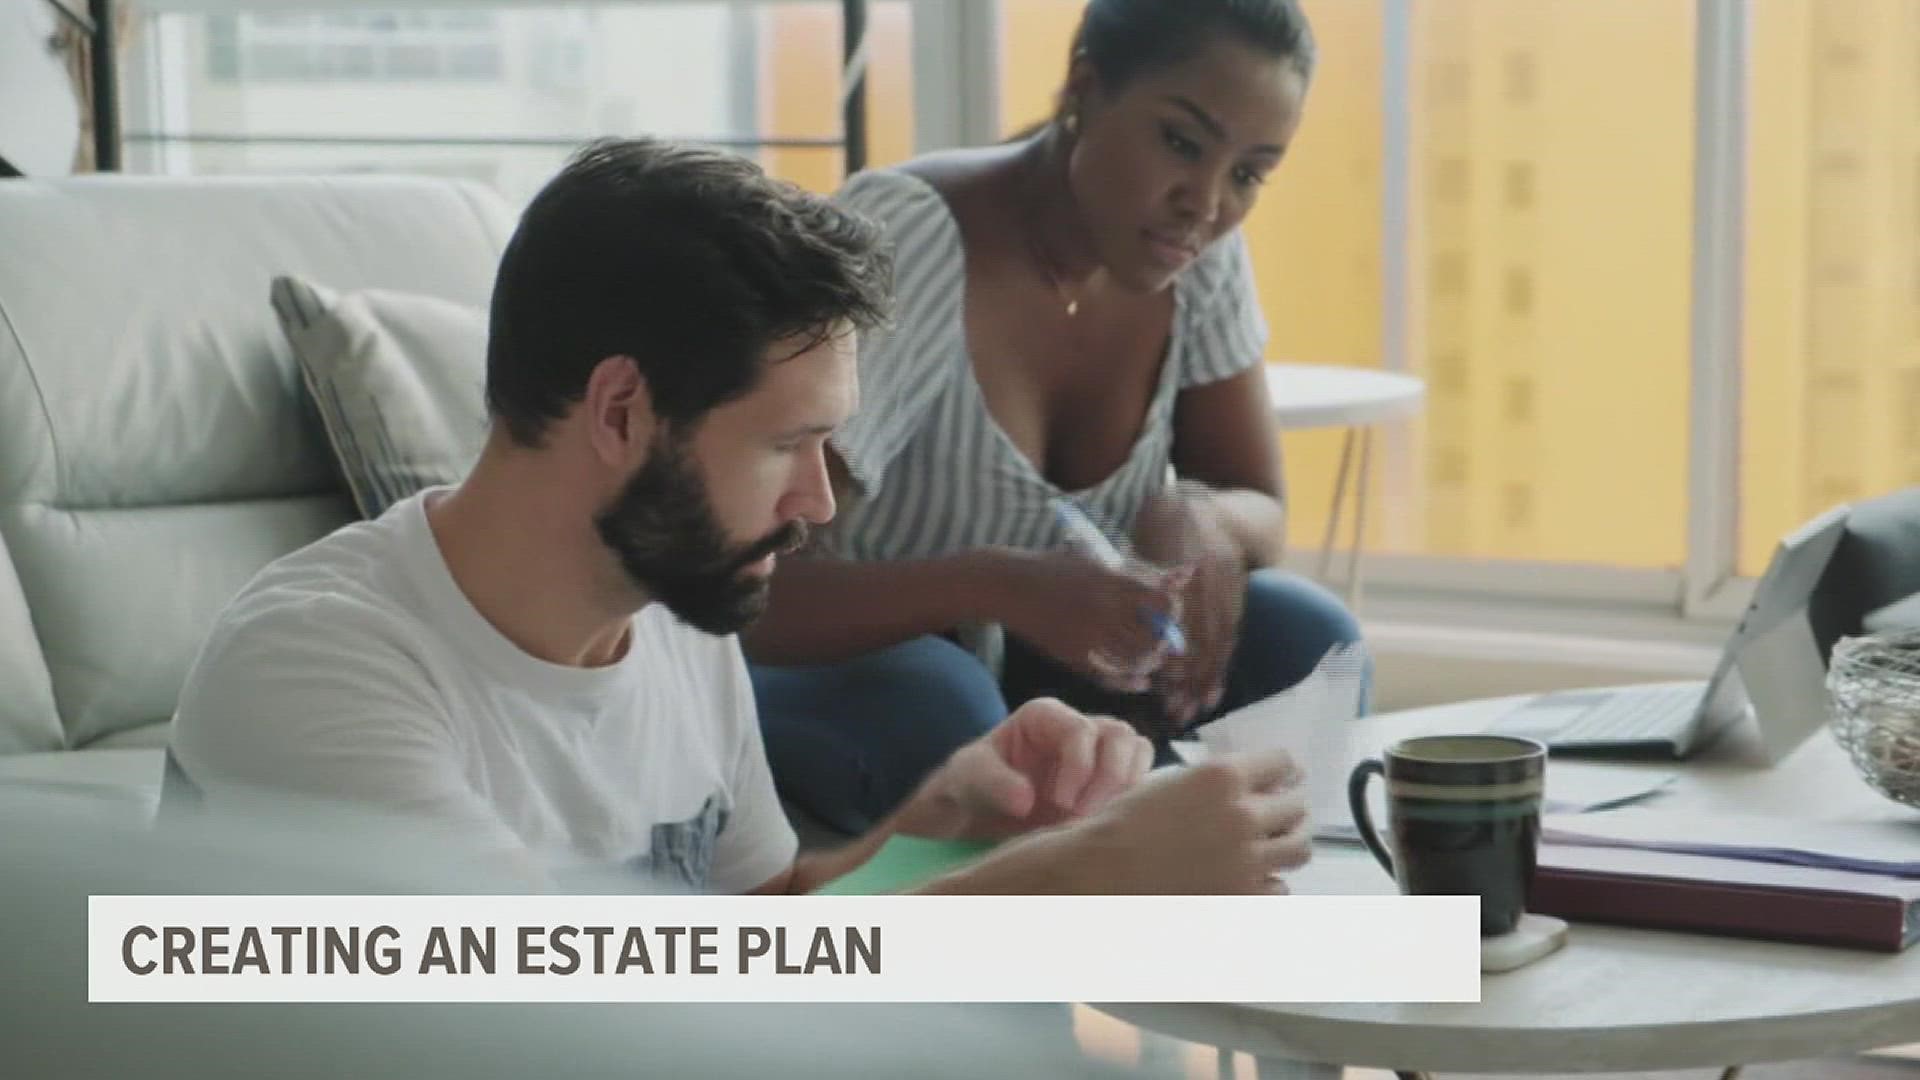 Experts say every family should have a plan in place